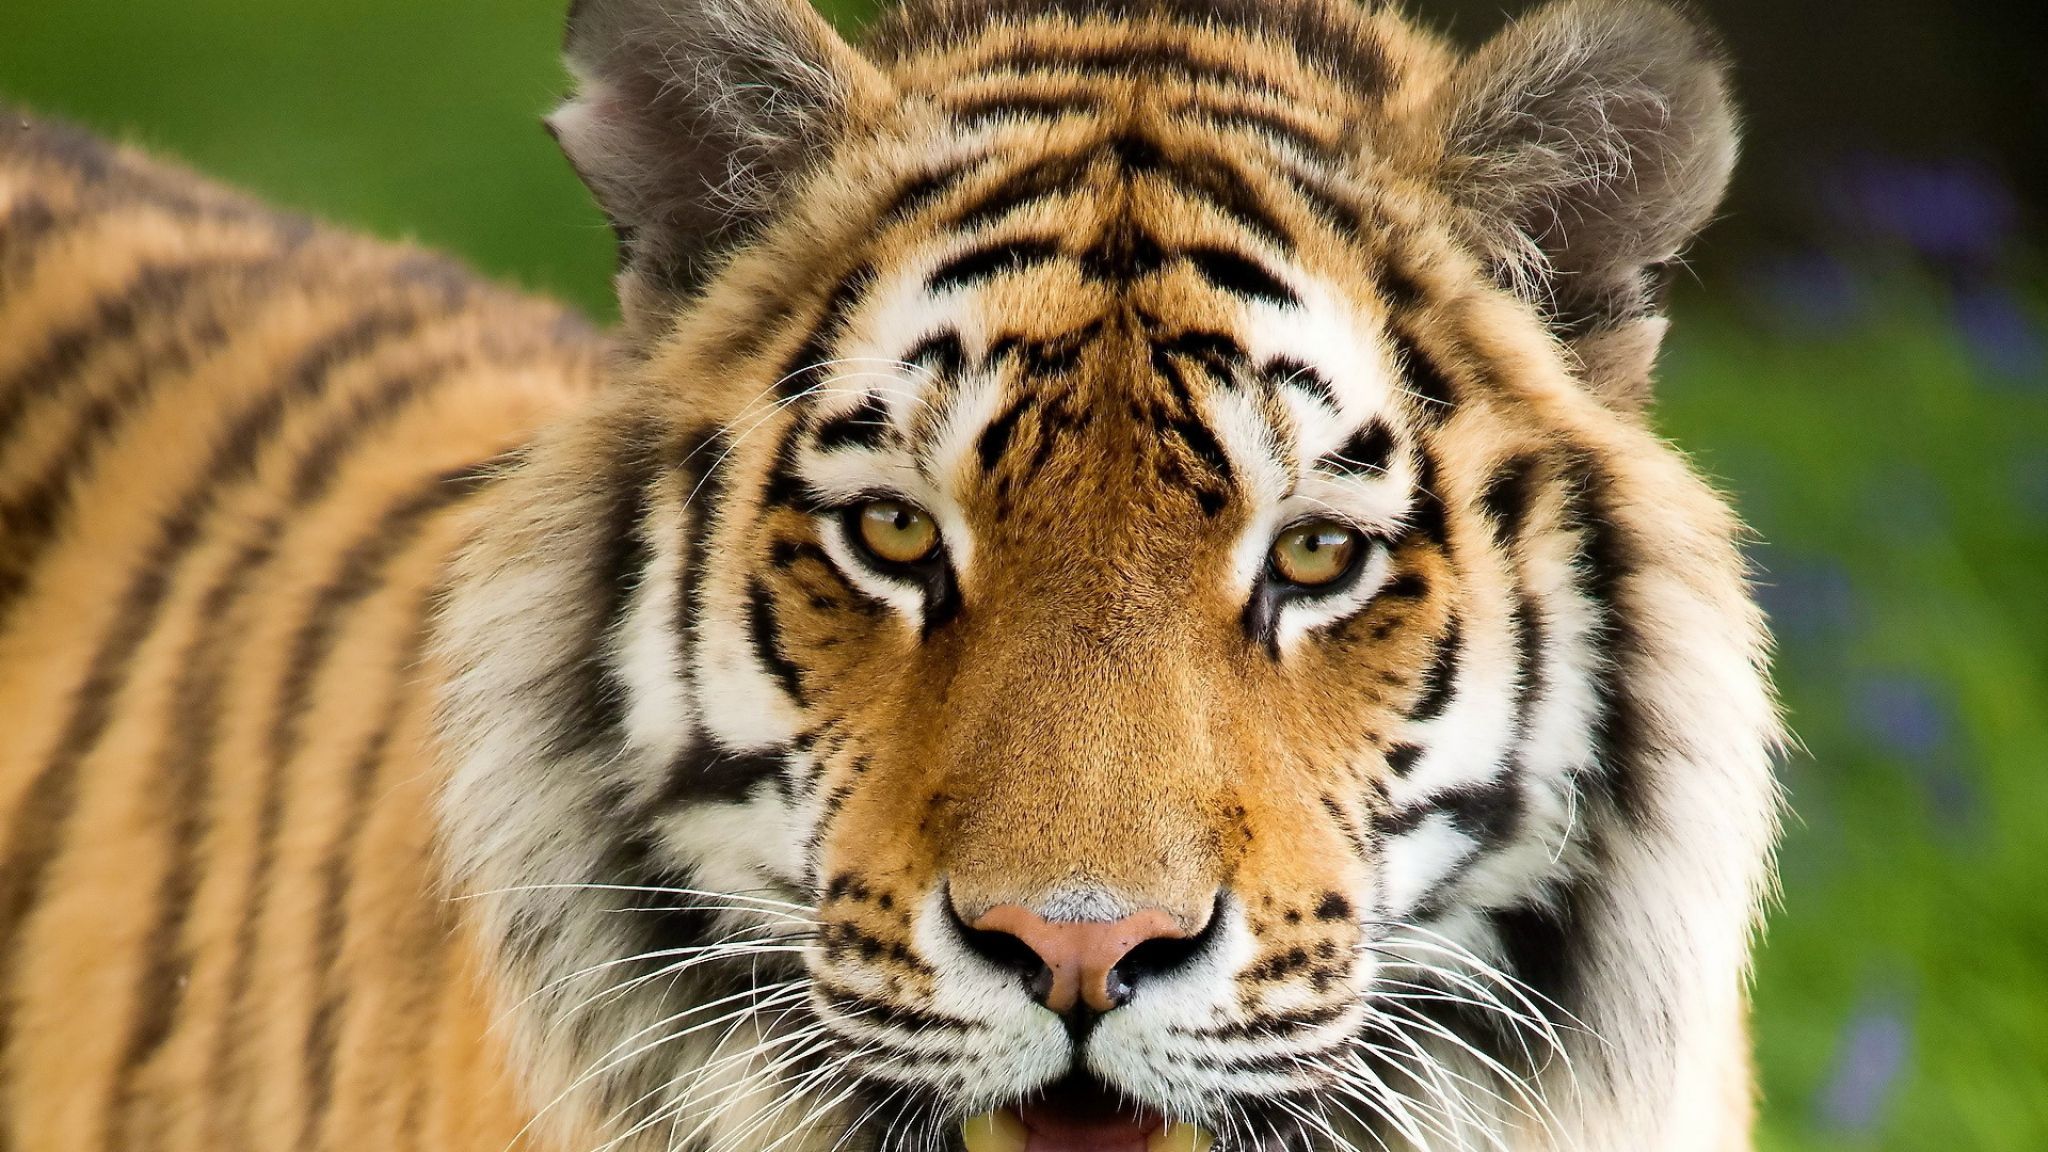 Download Wallpaper 2048x1152 Tiger, Aggression, Face, Mouth open